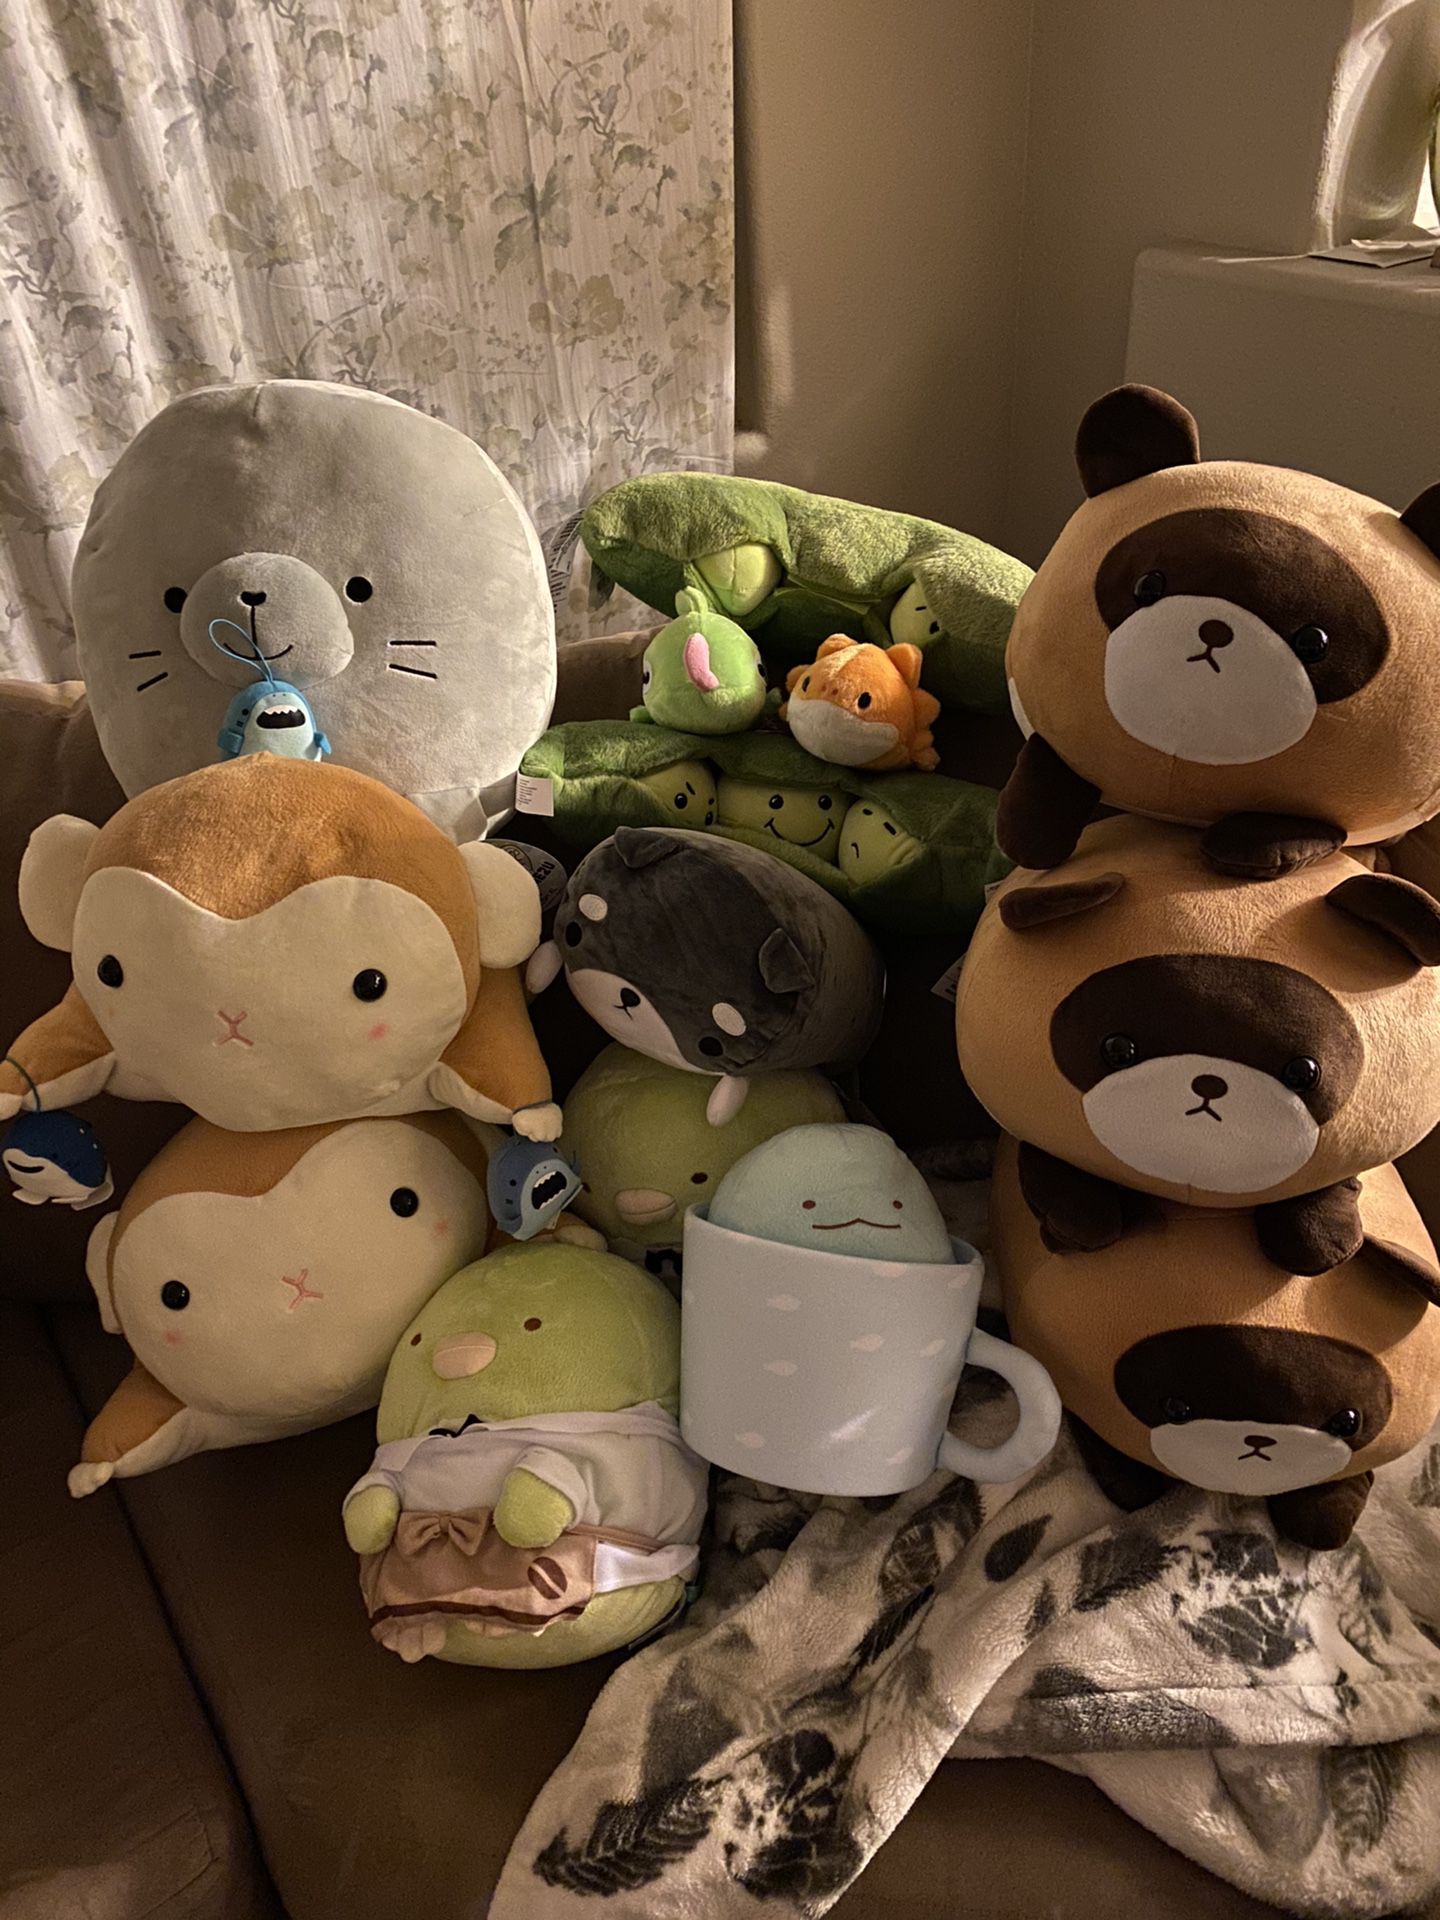 Plushy sale! All new and ready to go!